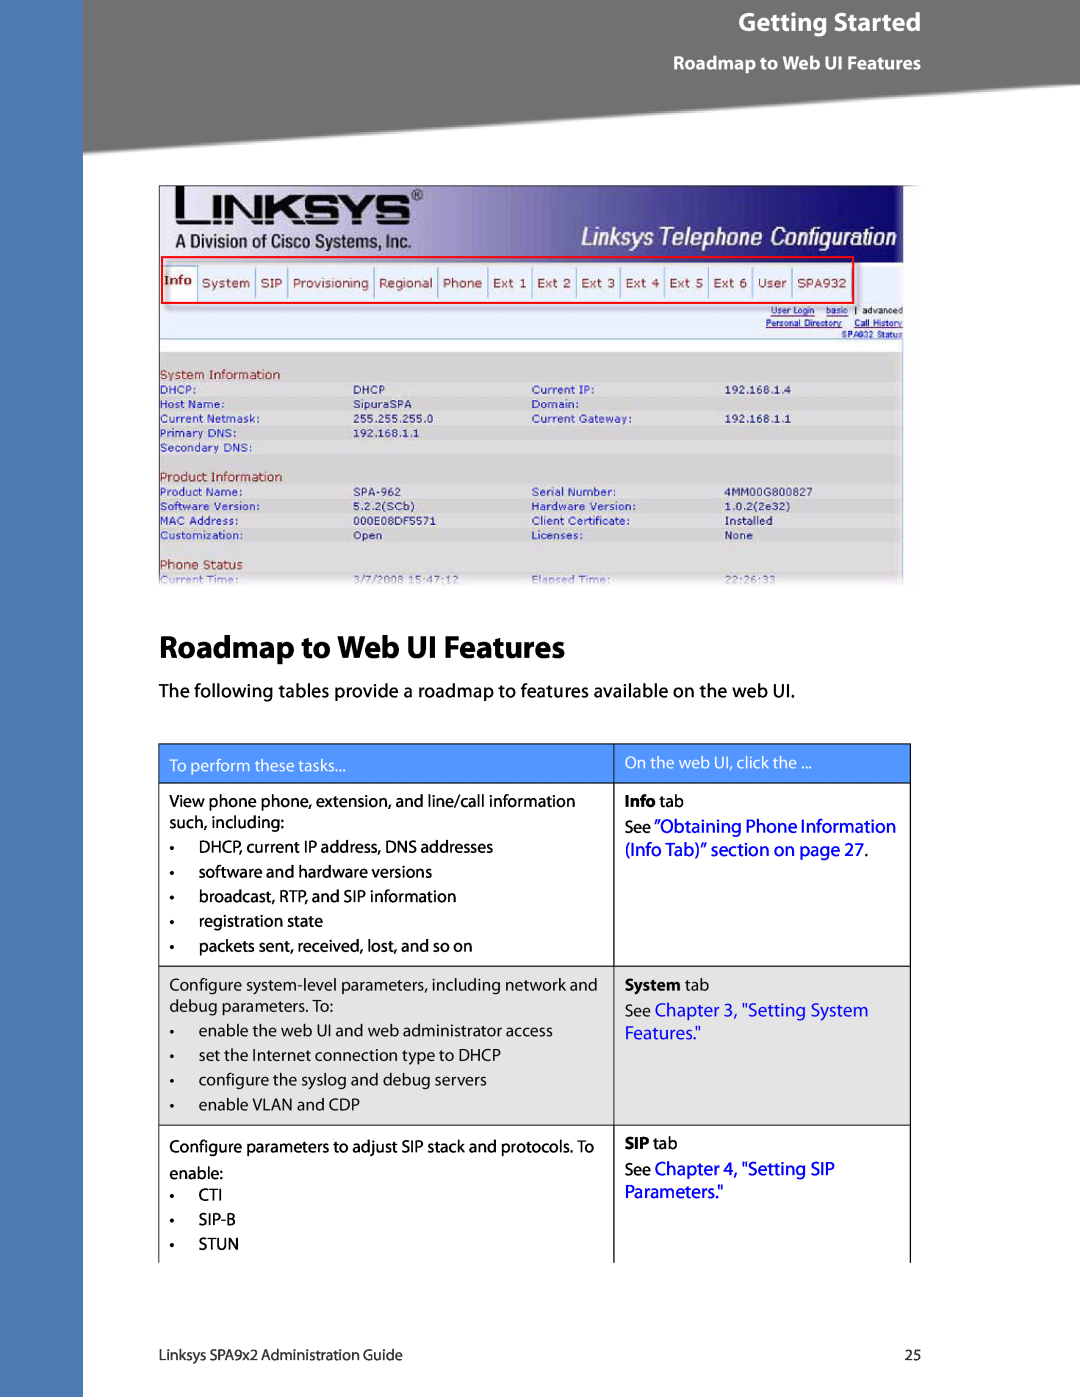 Linksys SPA962 Roadmap to Web UI Features, See ”Obtaining Phone Information, Info Tab” section on page, See , Setting SIP 